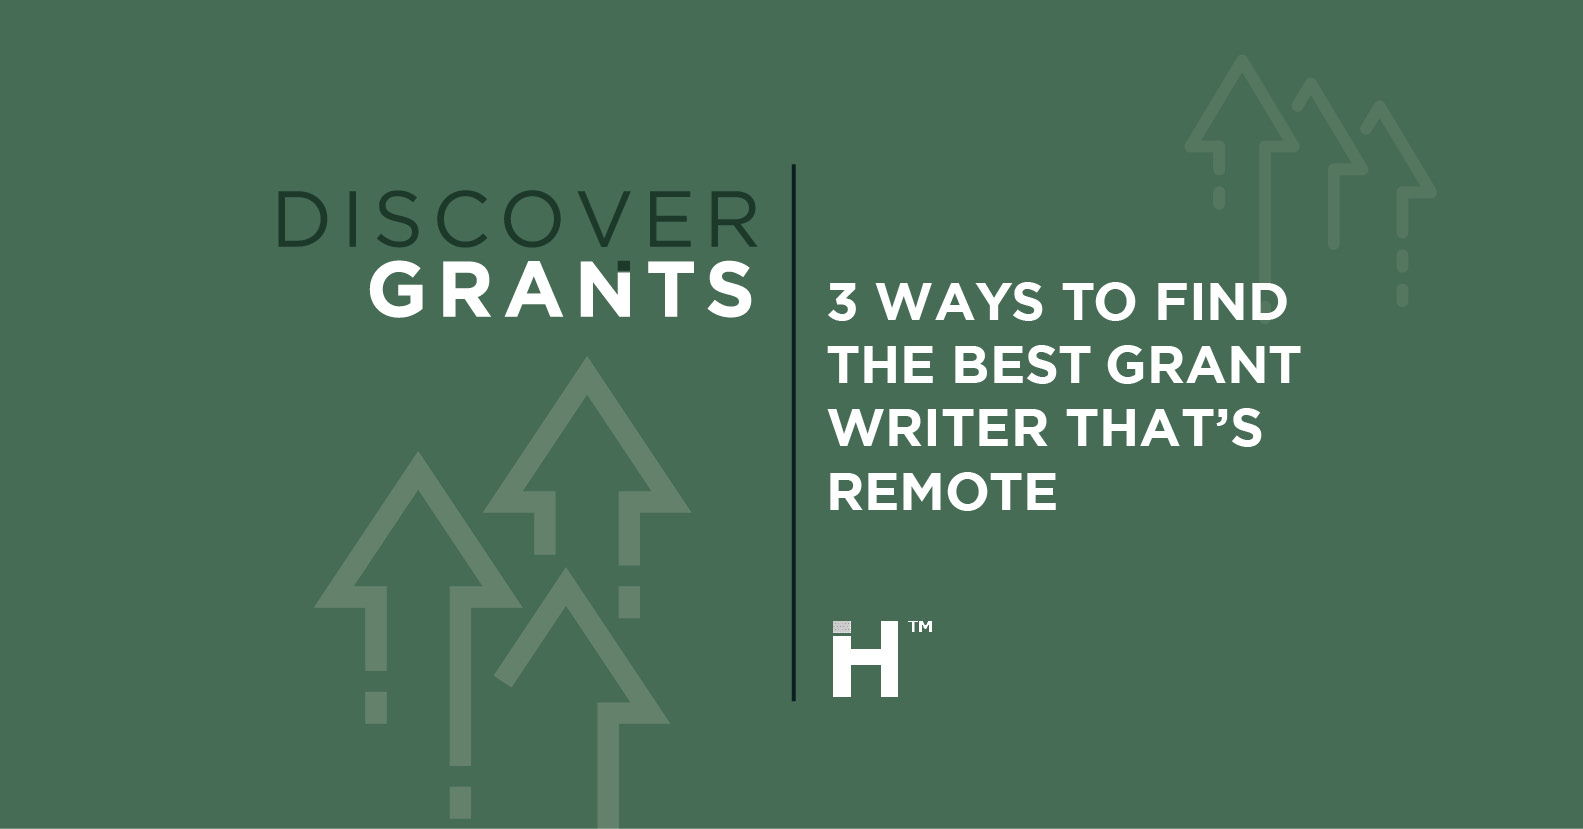 What to Expect From a Grant Writer That’s Remote